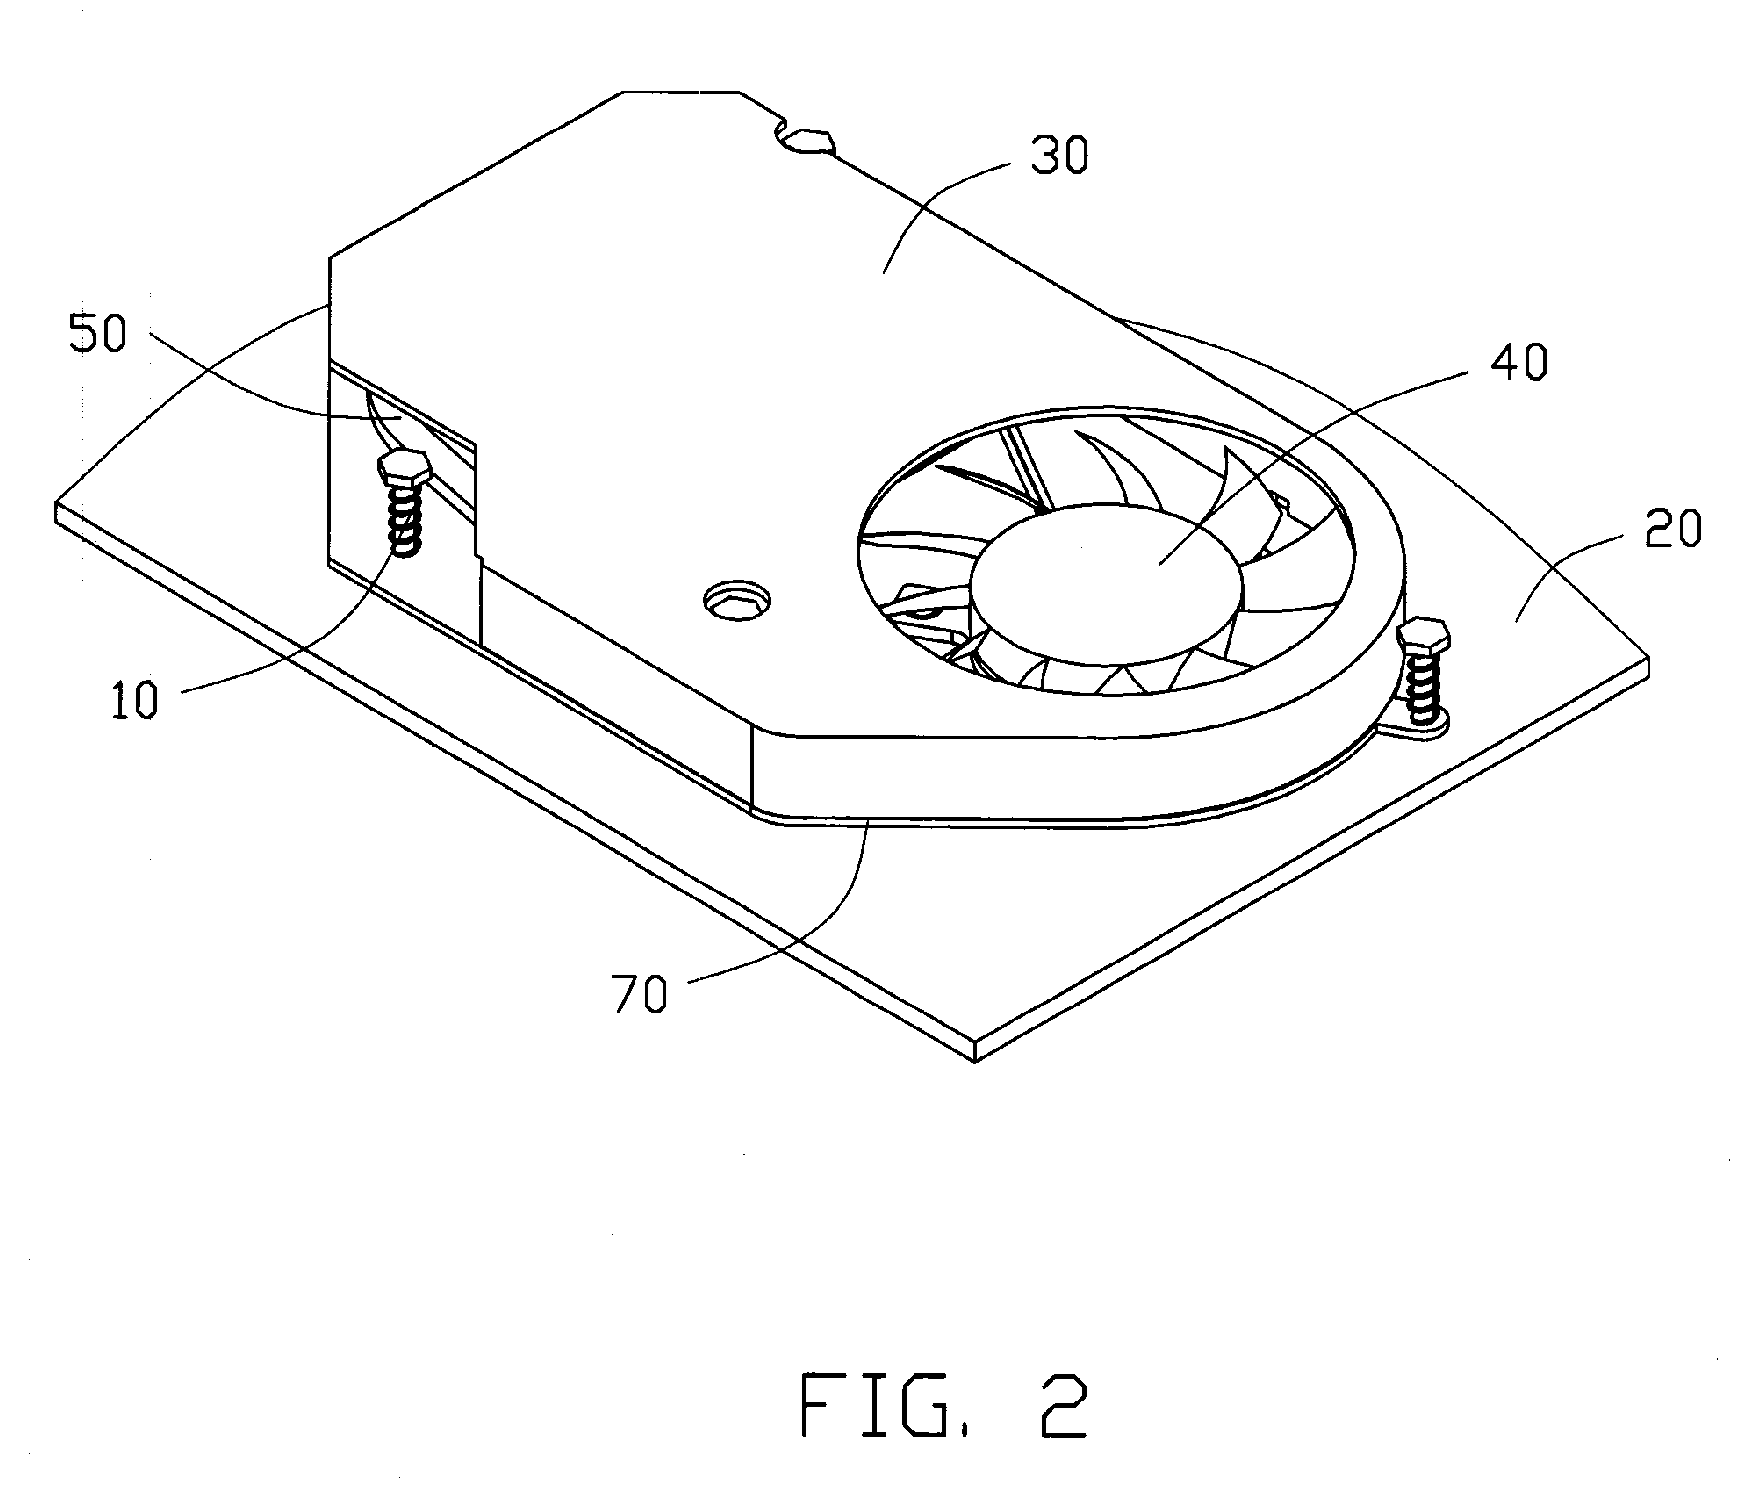 Heat dissipating apparatus for computer add-on cards